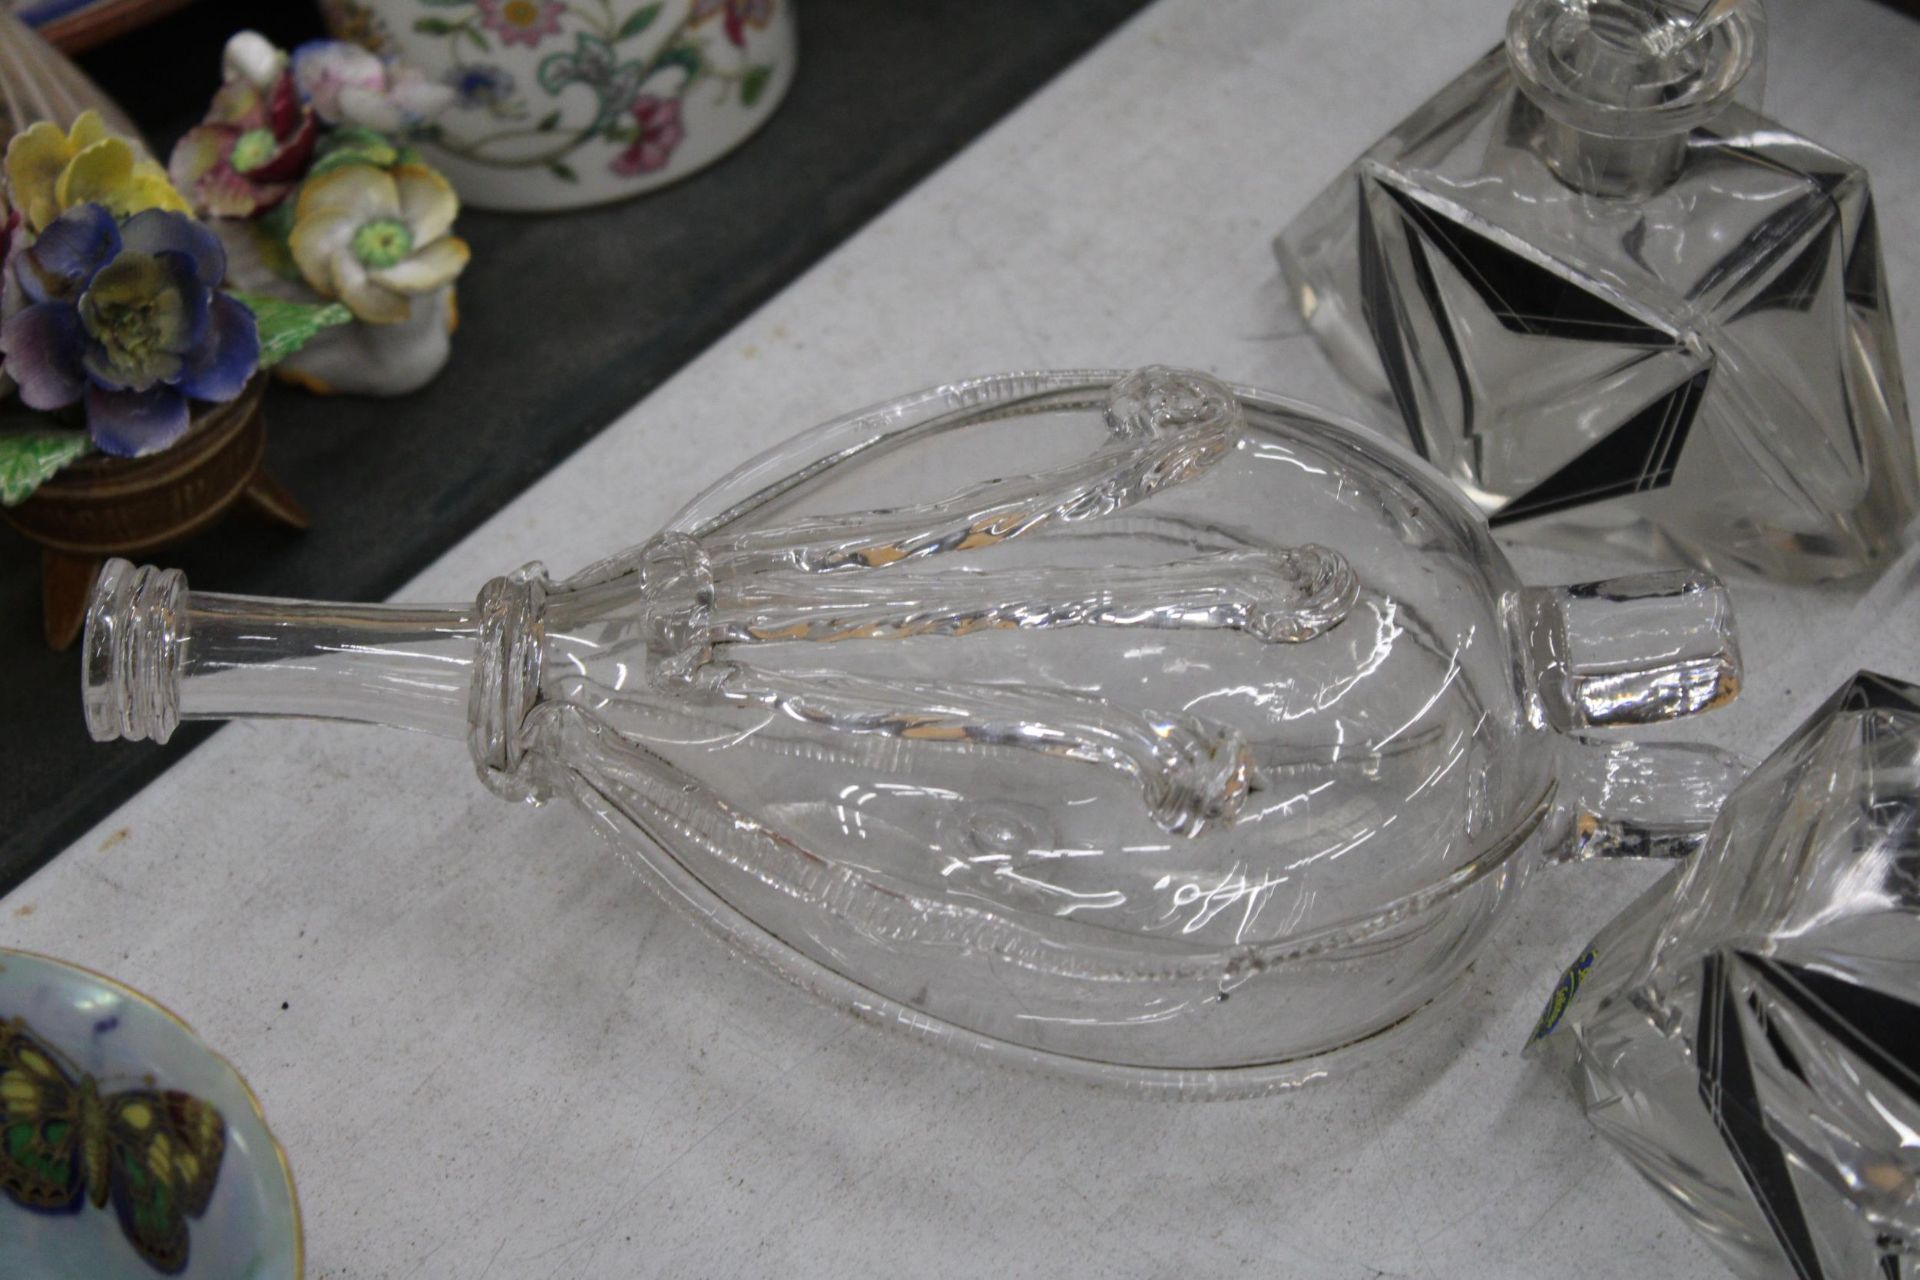 THREE ART DECO STYLE GLASS ITEMS TO INCLUDE SCENT BOTTLES, PLUS A VICTORIAN GLASS FLASK OF BELLOWS - Image 4 of 5